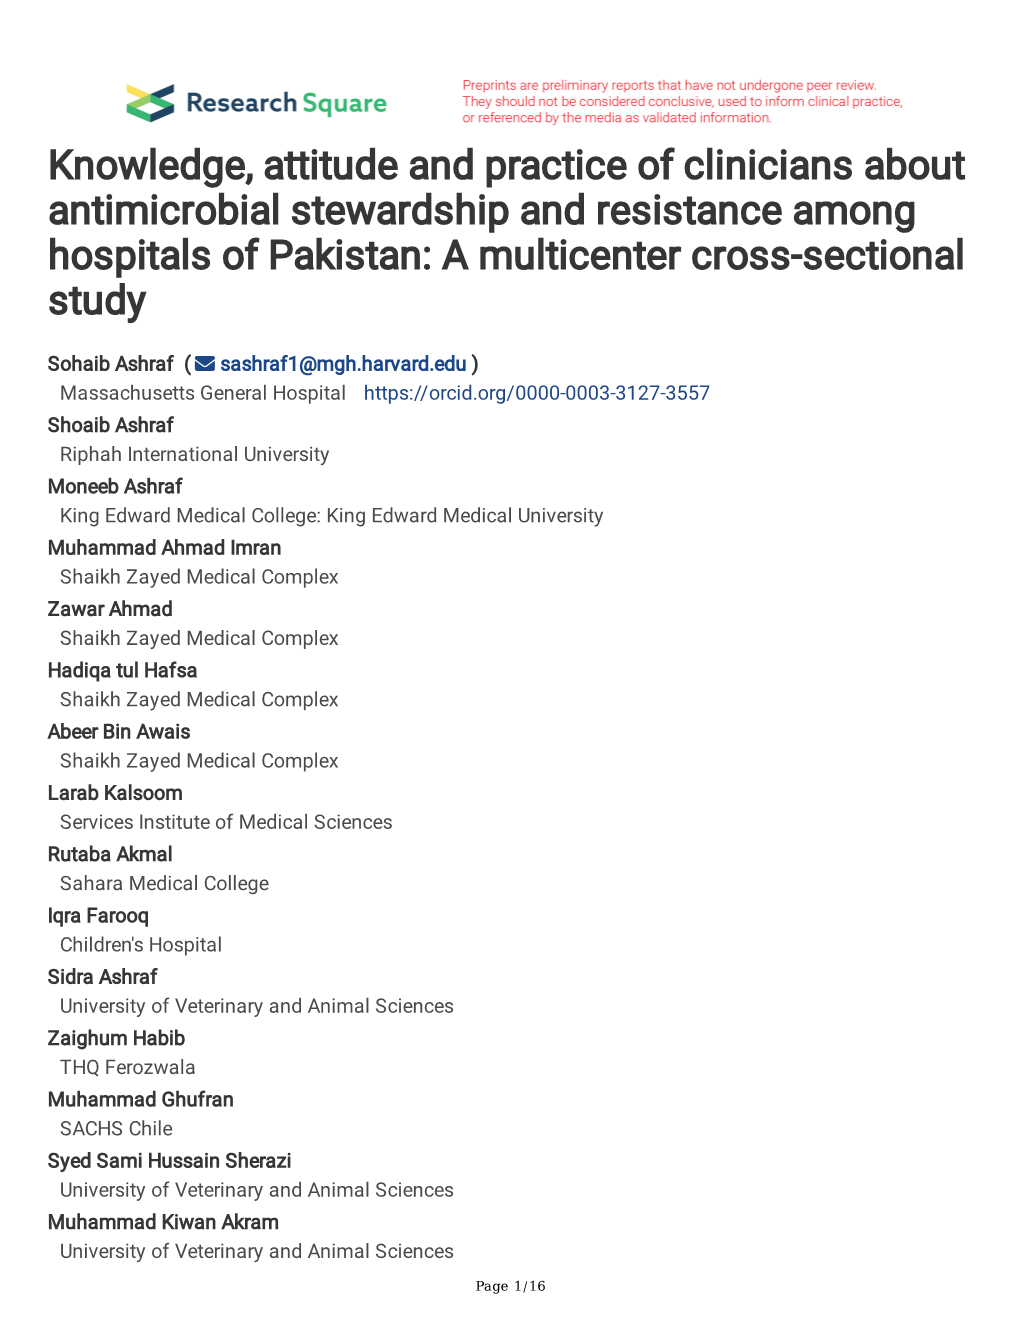 Knowledge, Attitude and Practice of Clinicians About Antimicrobial Stewardship and Resistance Among Hospitals of Pakistan: a Multicenter Cross-Sectional Study